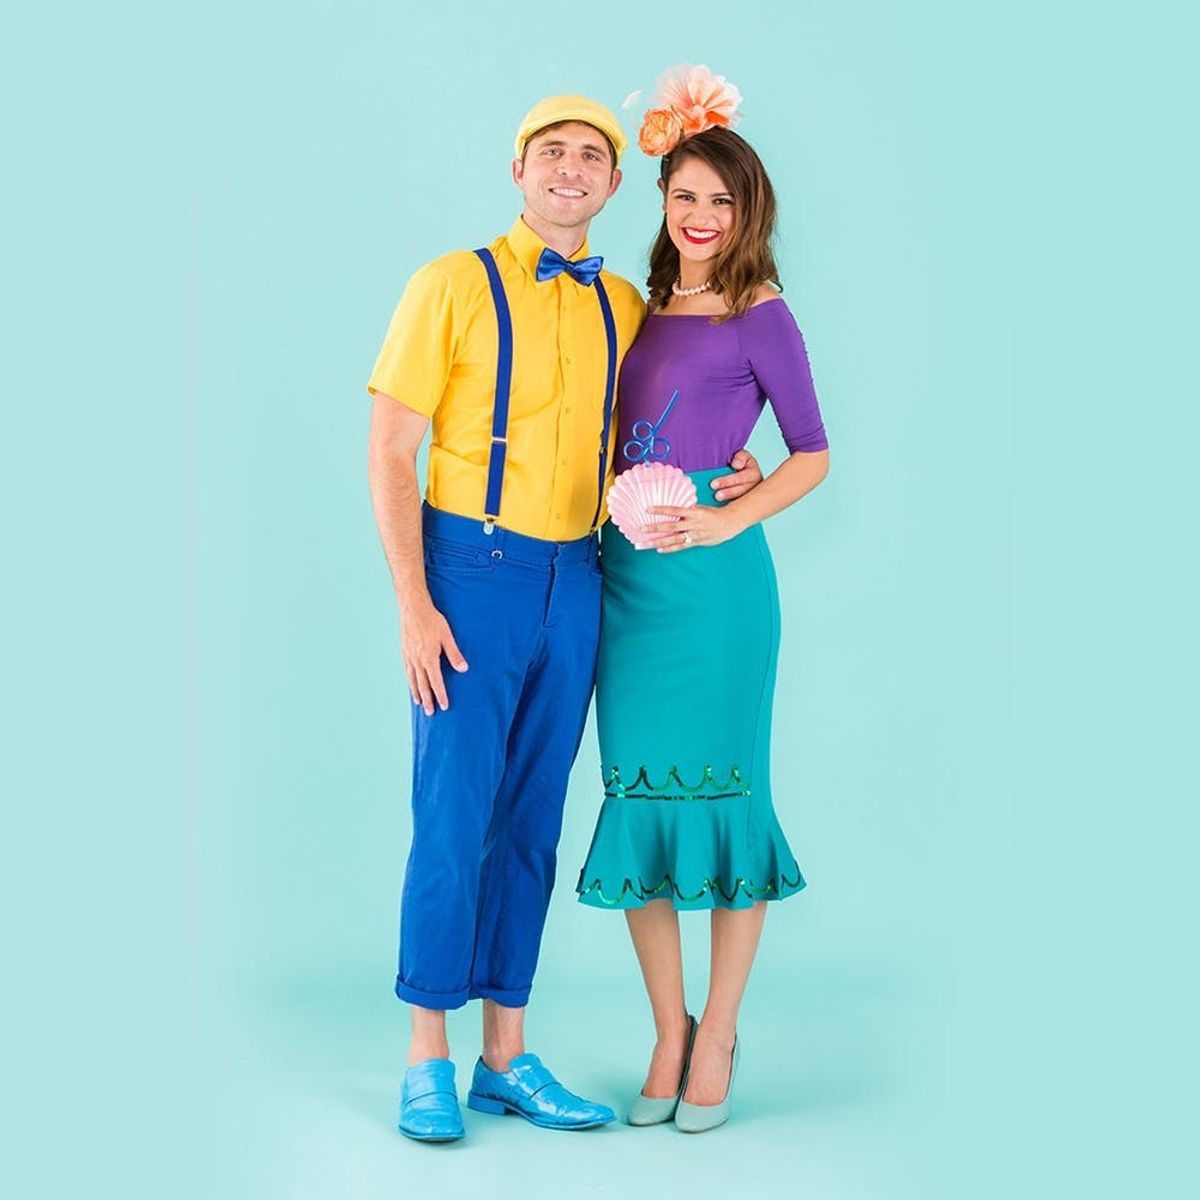 These 4 Dapper Disney Couples Costumes Will Give You a Magical Halloween